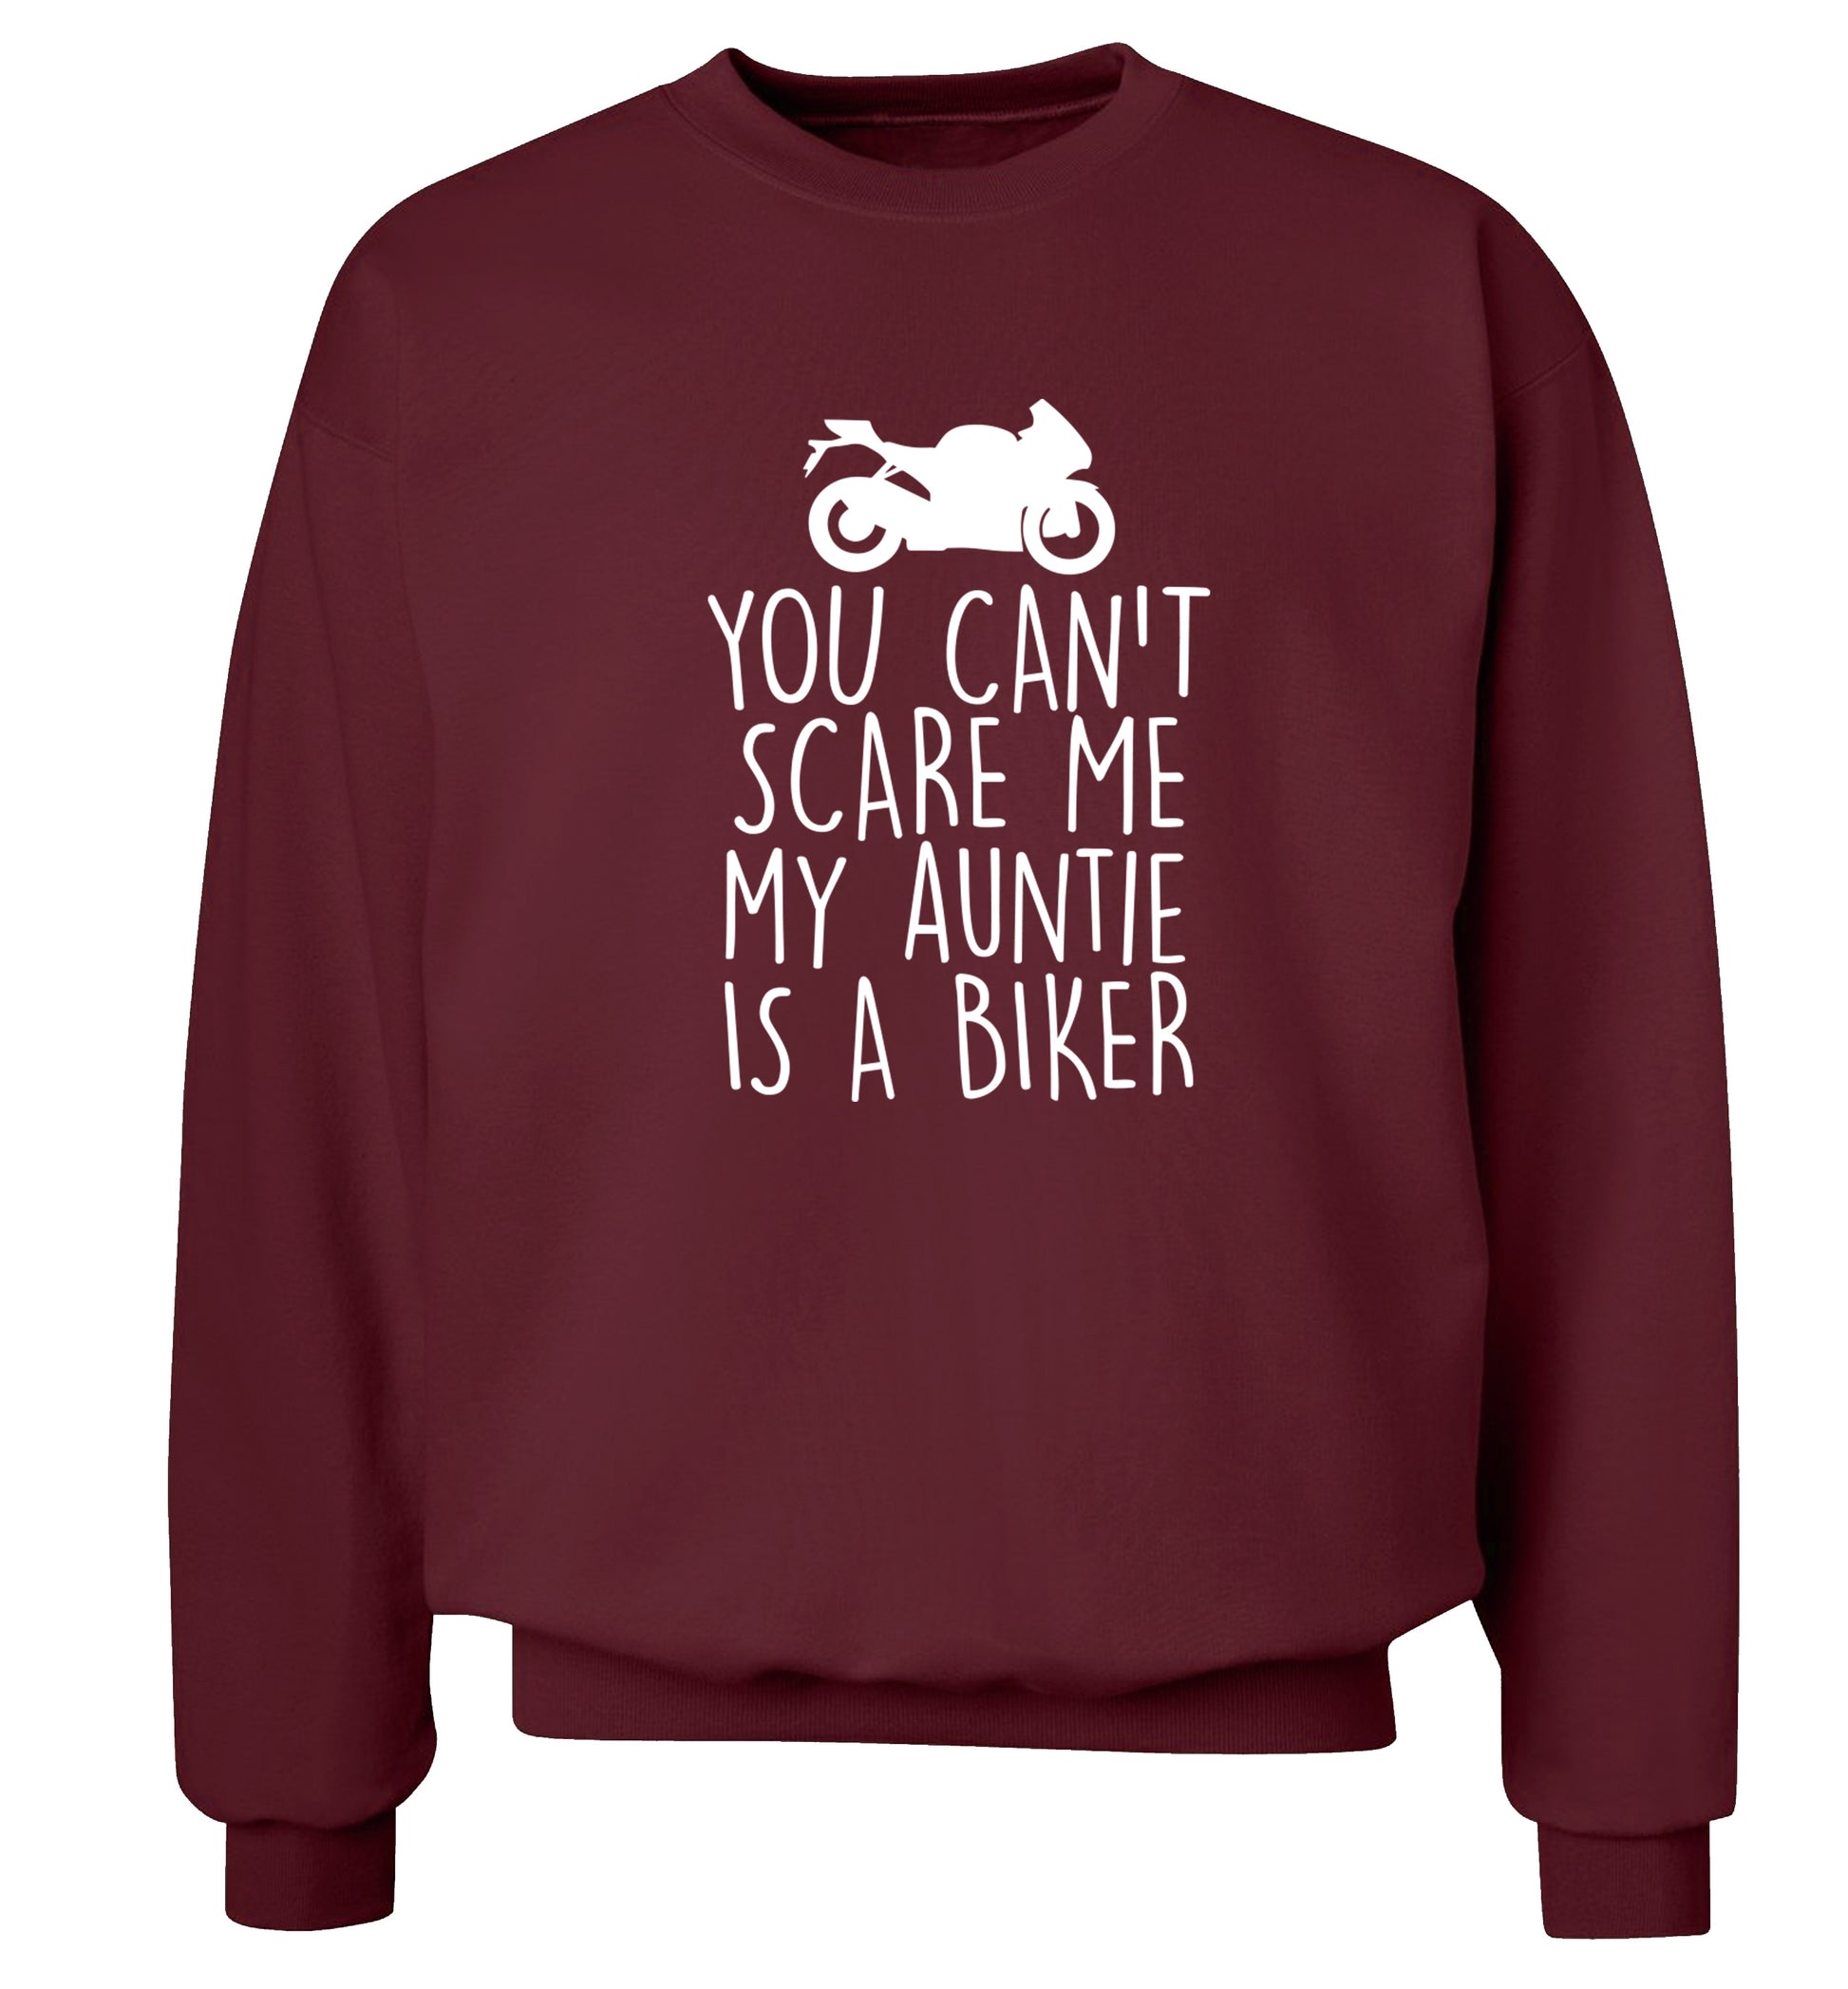 You can't scare me my auntie is a biker Adult's unisex maroon Sweater 2XL